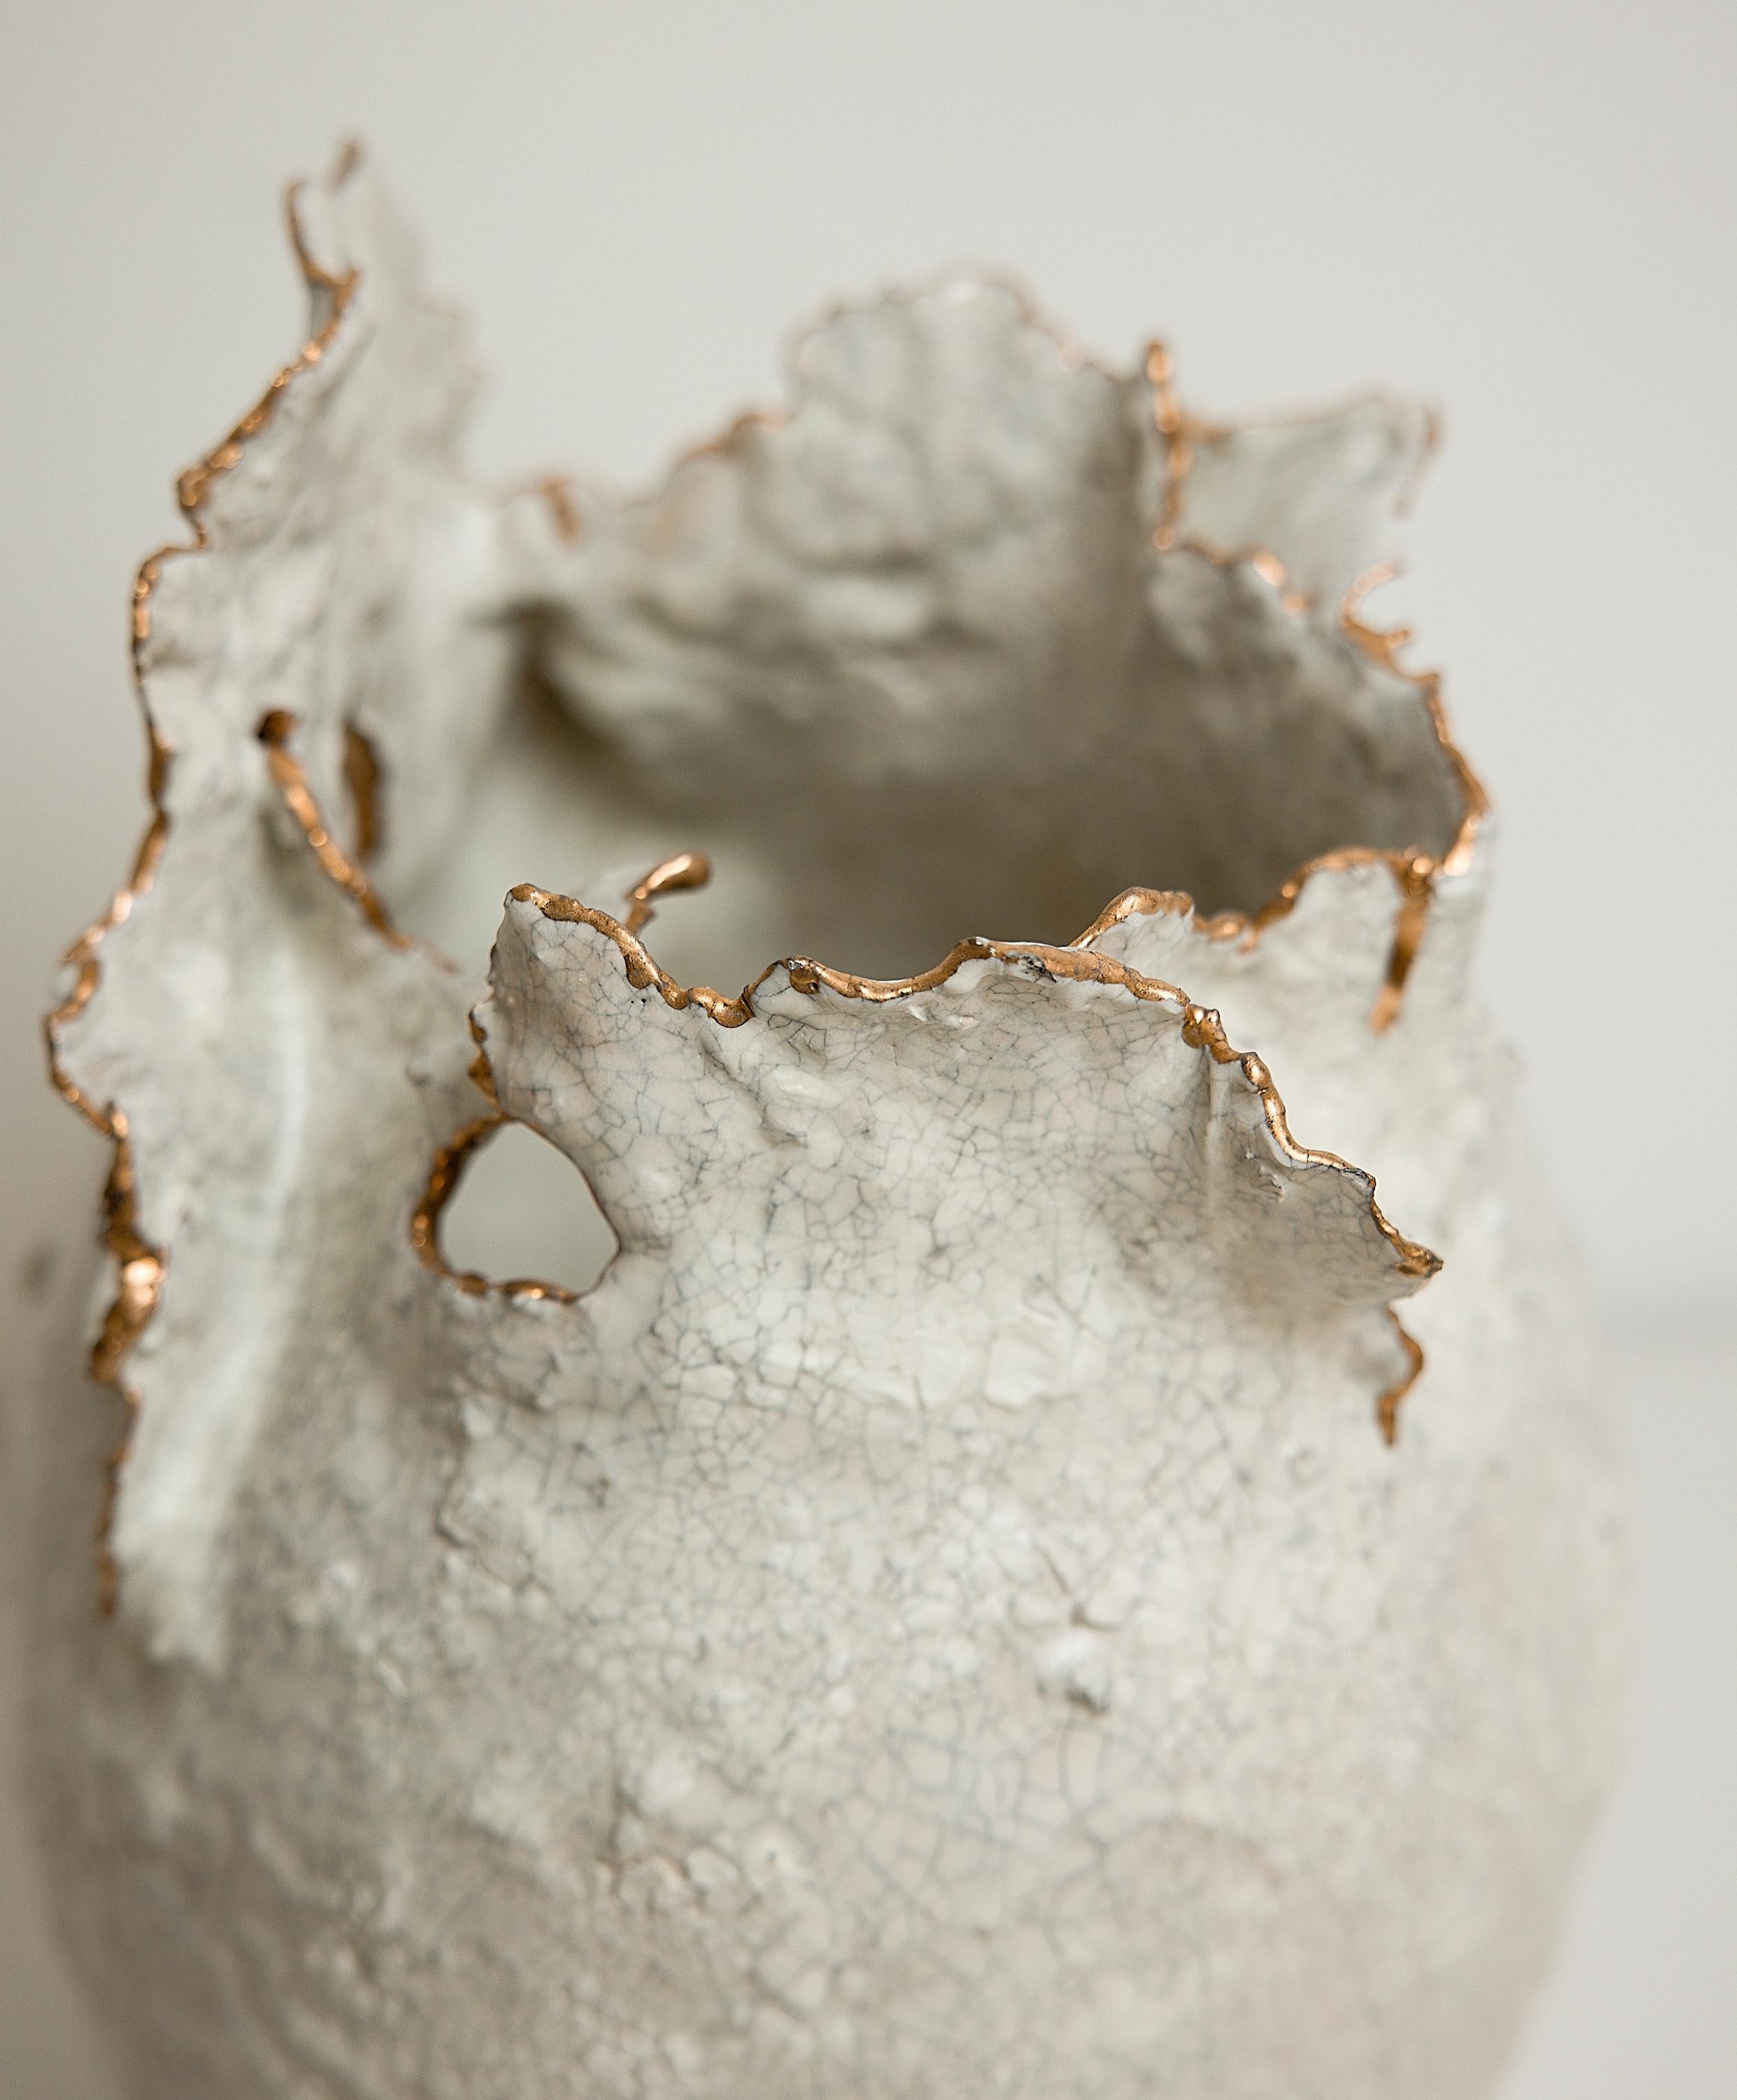 Bring a touch of modern style to your home with our Drift Torn Edge Vases
one of kind 
this White open  jar with Textured drips and lava glaze
one of a kind
with the brilliance of 22-karat yellow gold

., each striking vase features a unique,